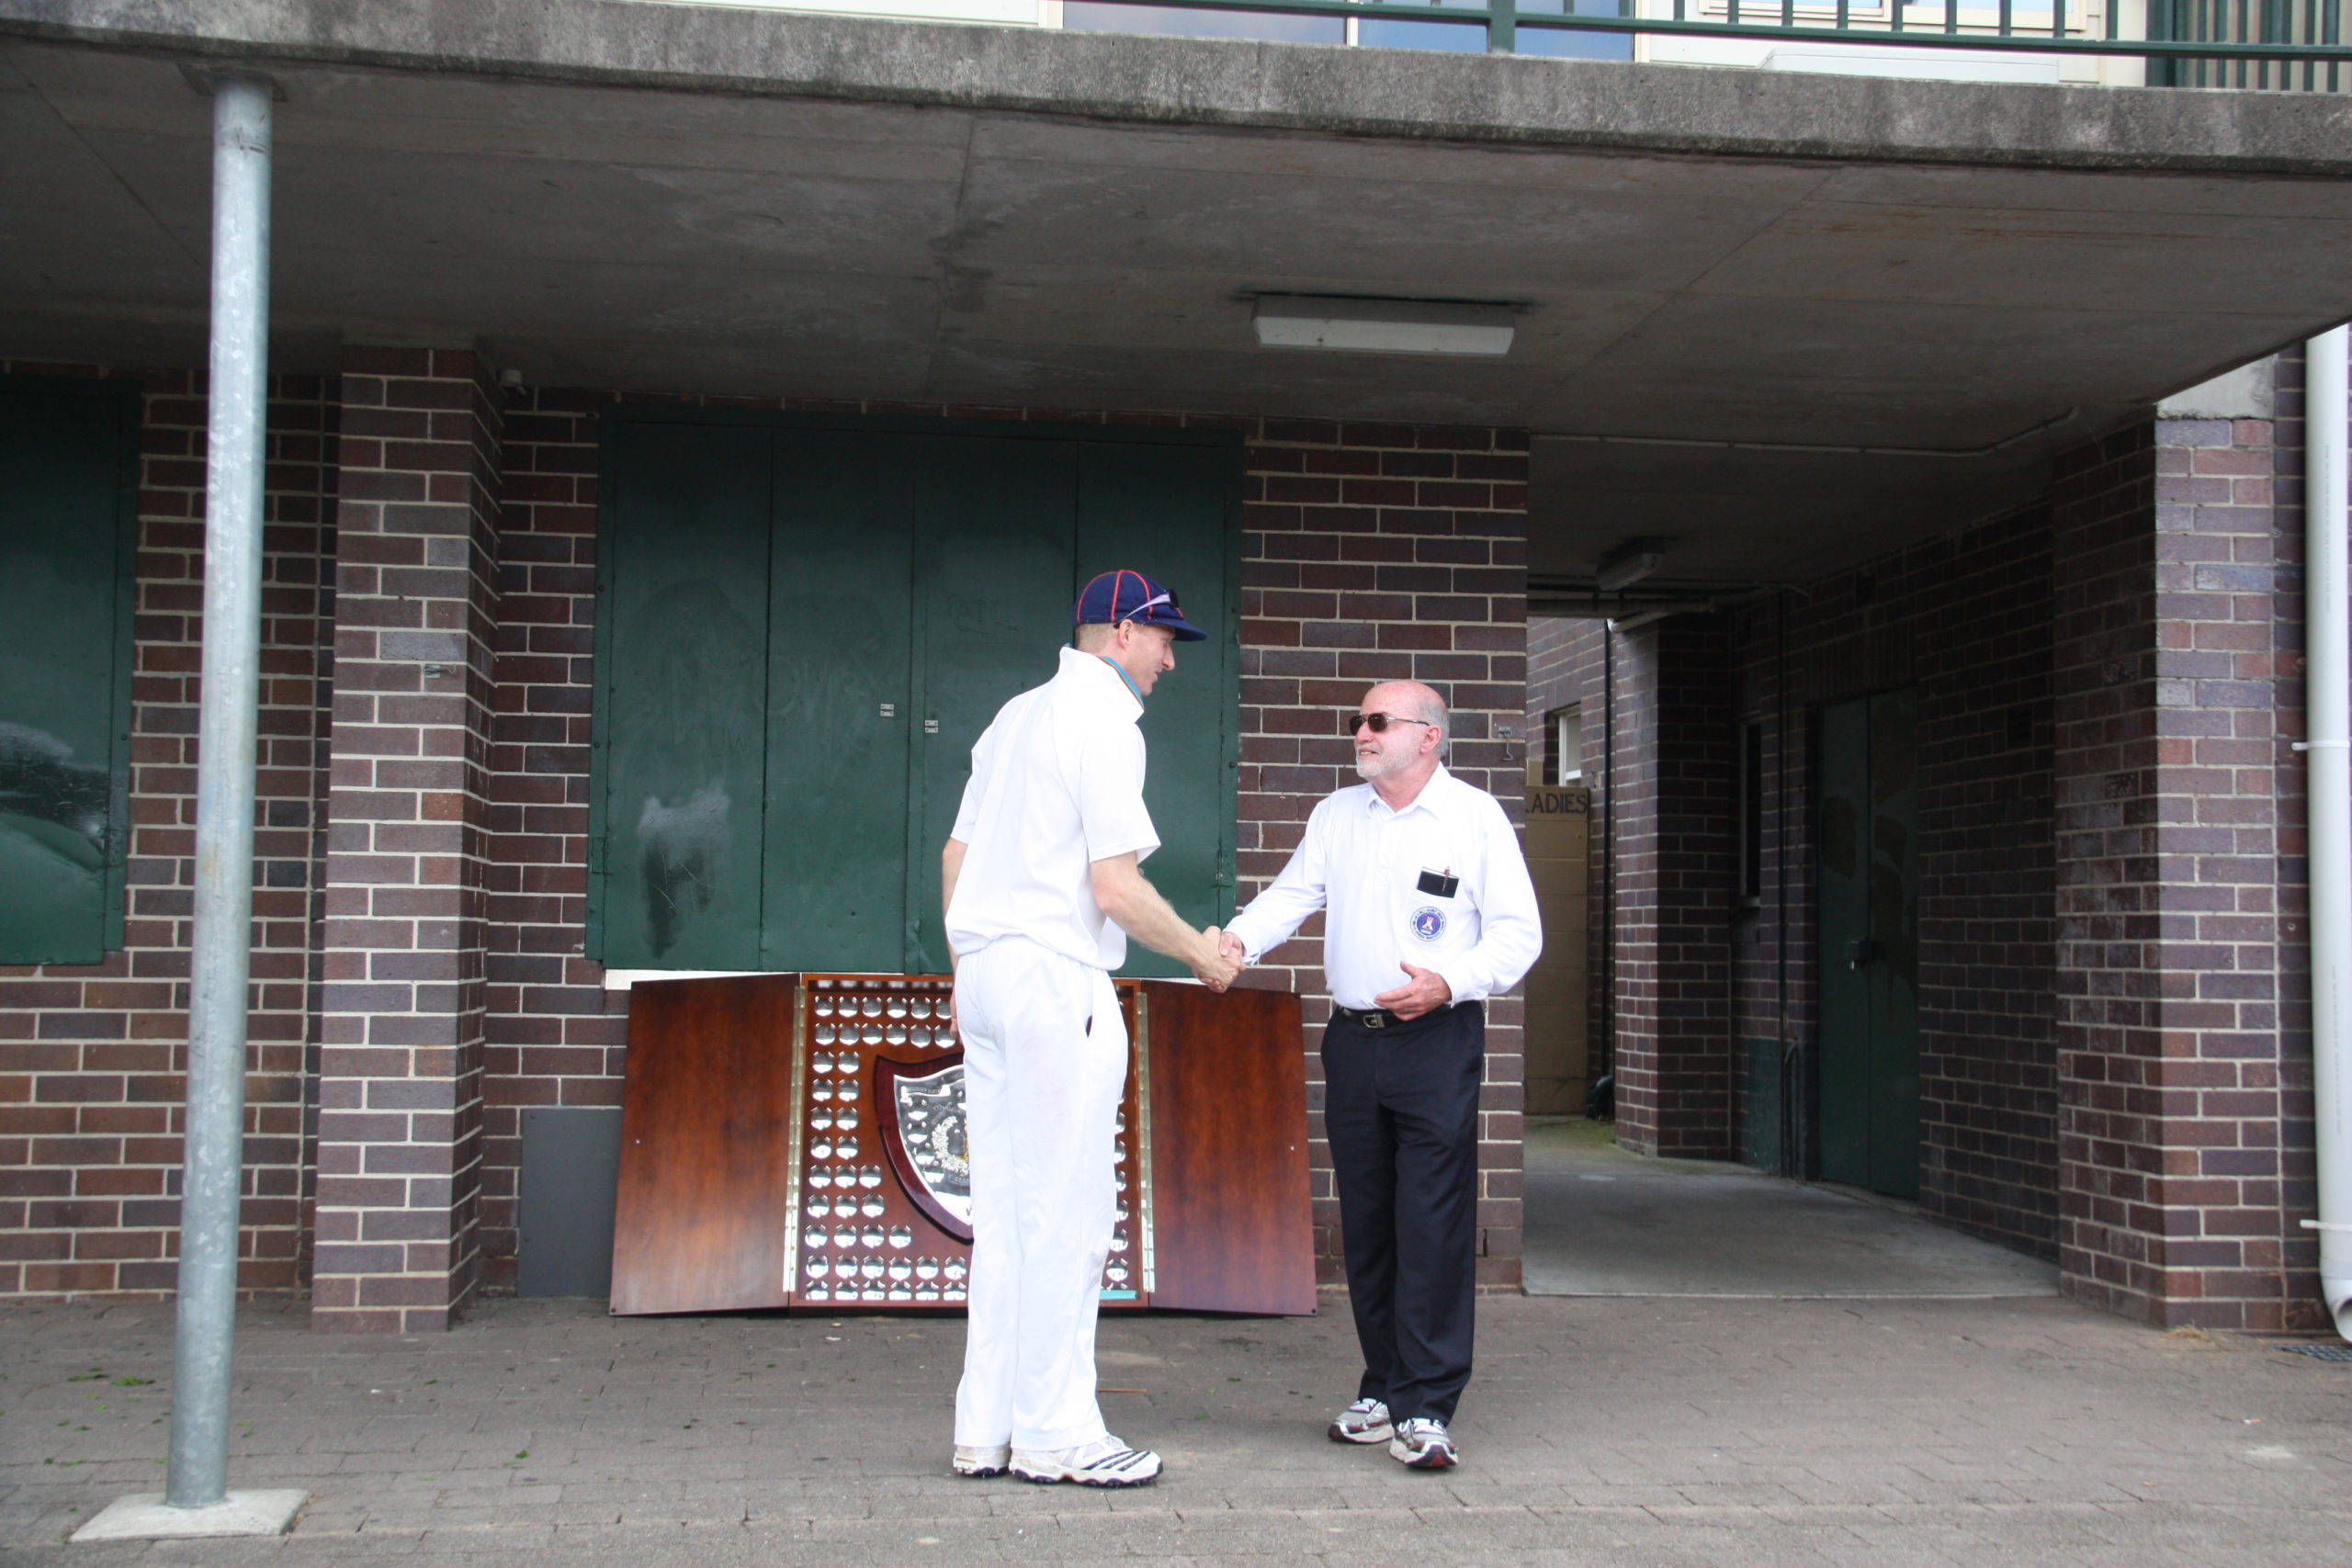 A1 Grade Premiers 2011/12 (Rofie 1) - James Makin with Umpire Geoff Hasler - Mark Taylor Oval Sunday 25th March 2012.